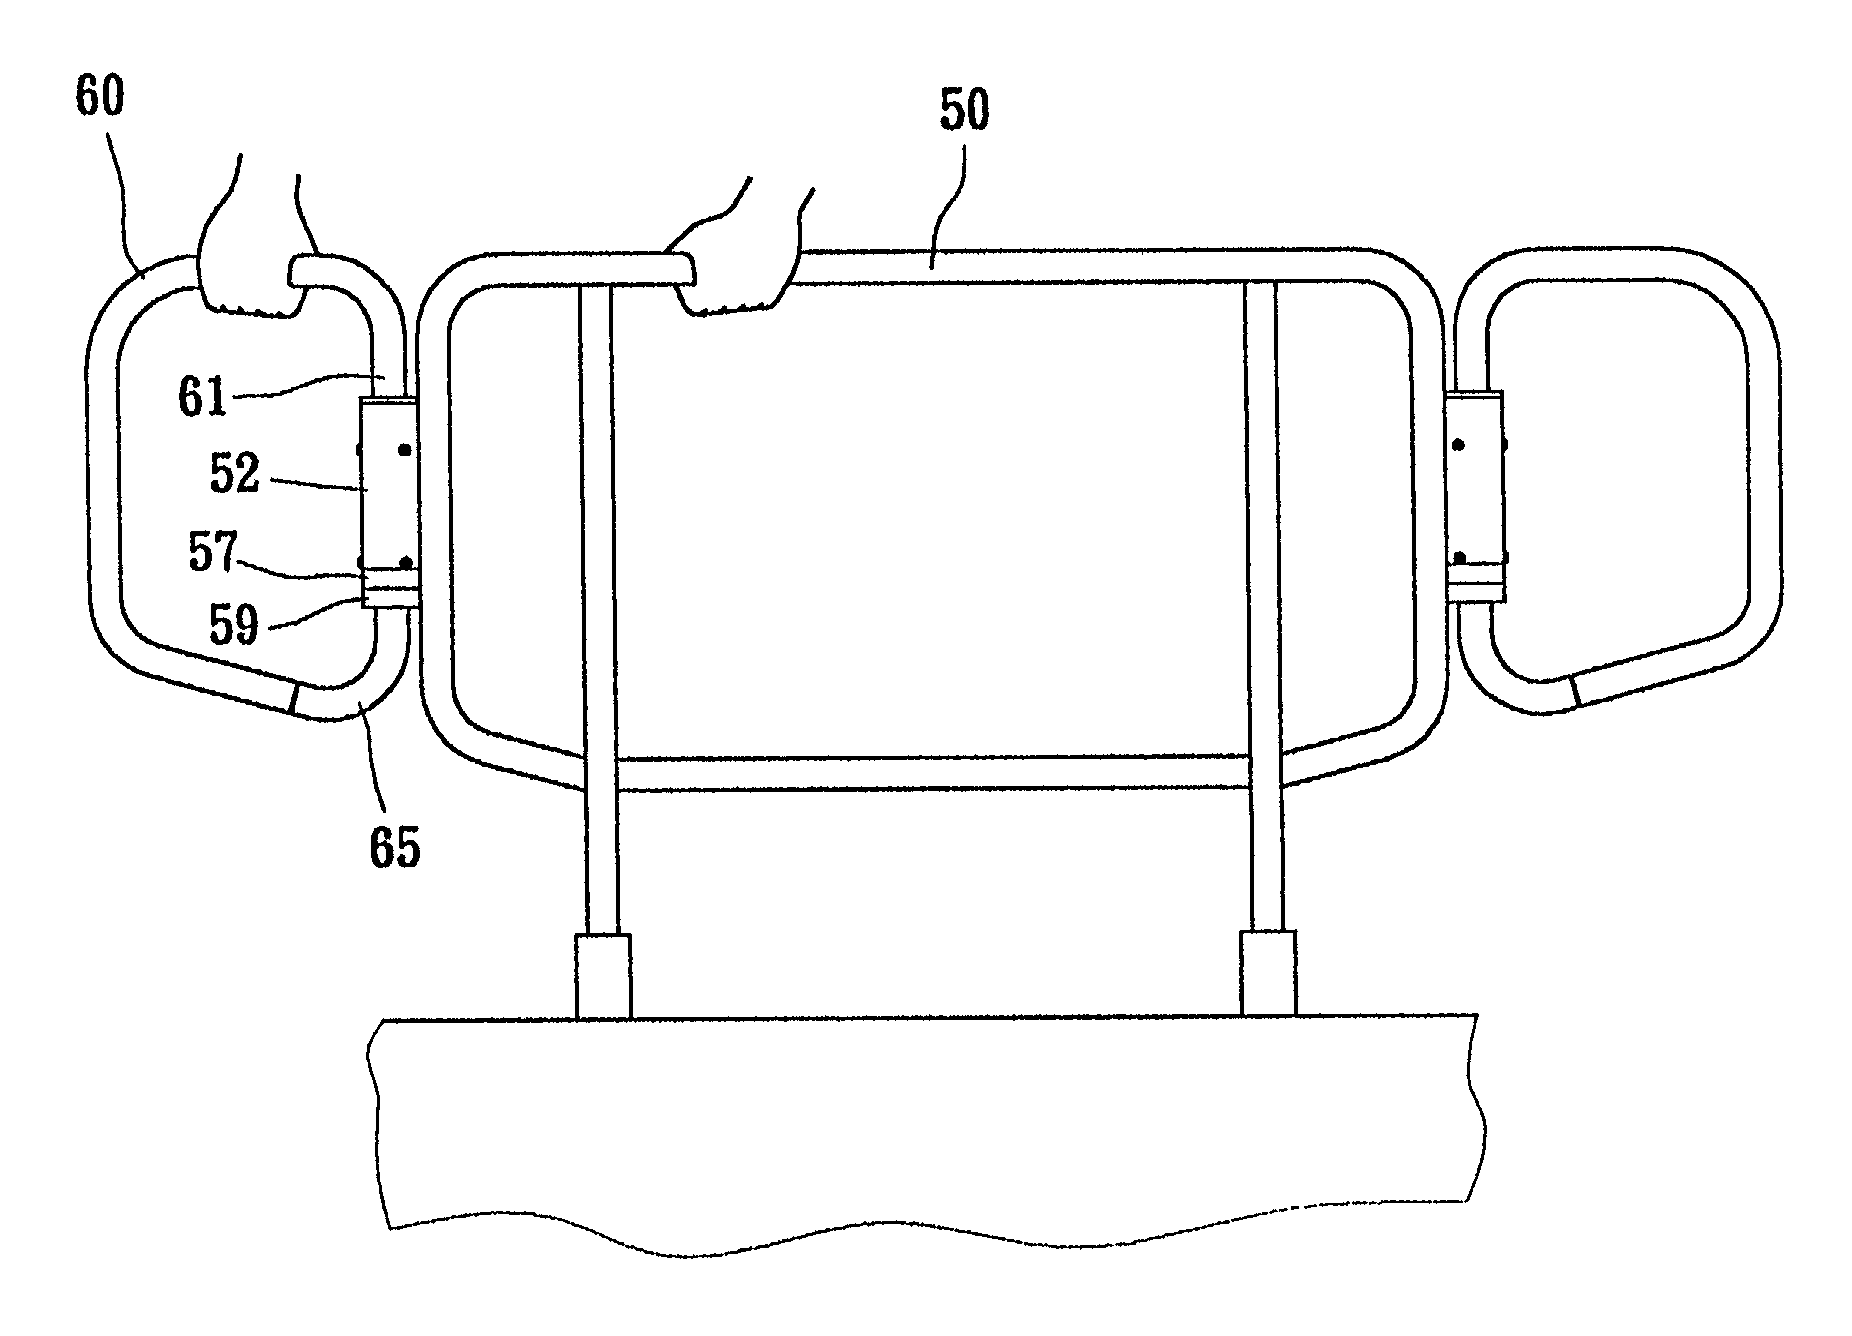 Self-positioning structure with adjustable frame body